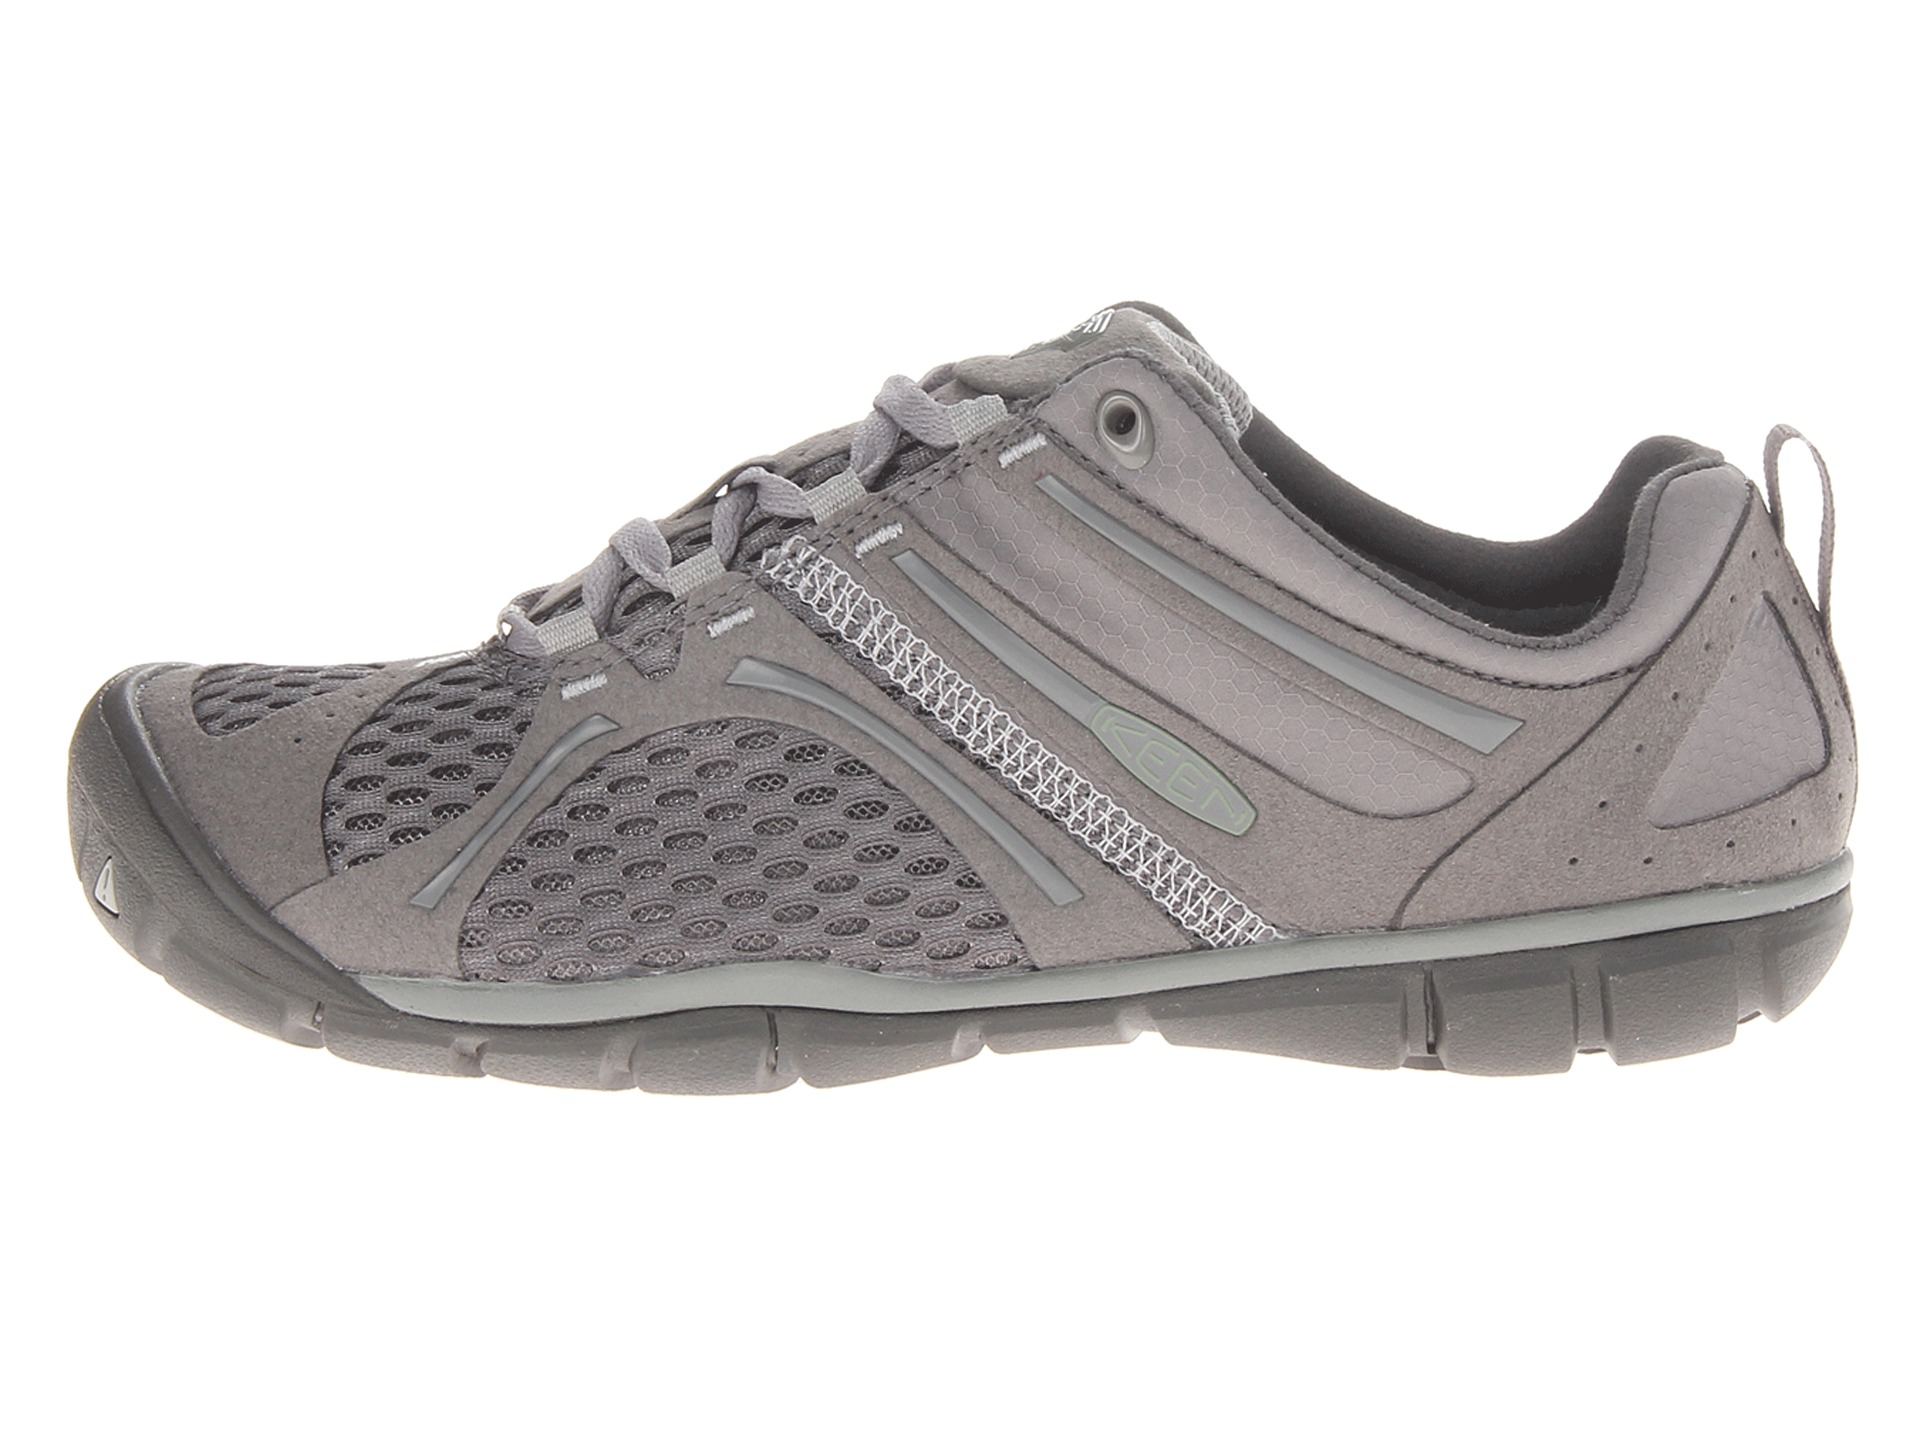 Keen Madison Low Cnx Neutral Gray Baltic | Shipped Free at Zappos